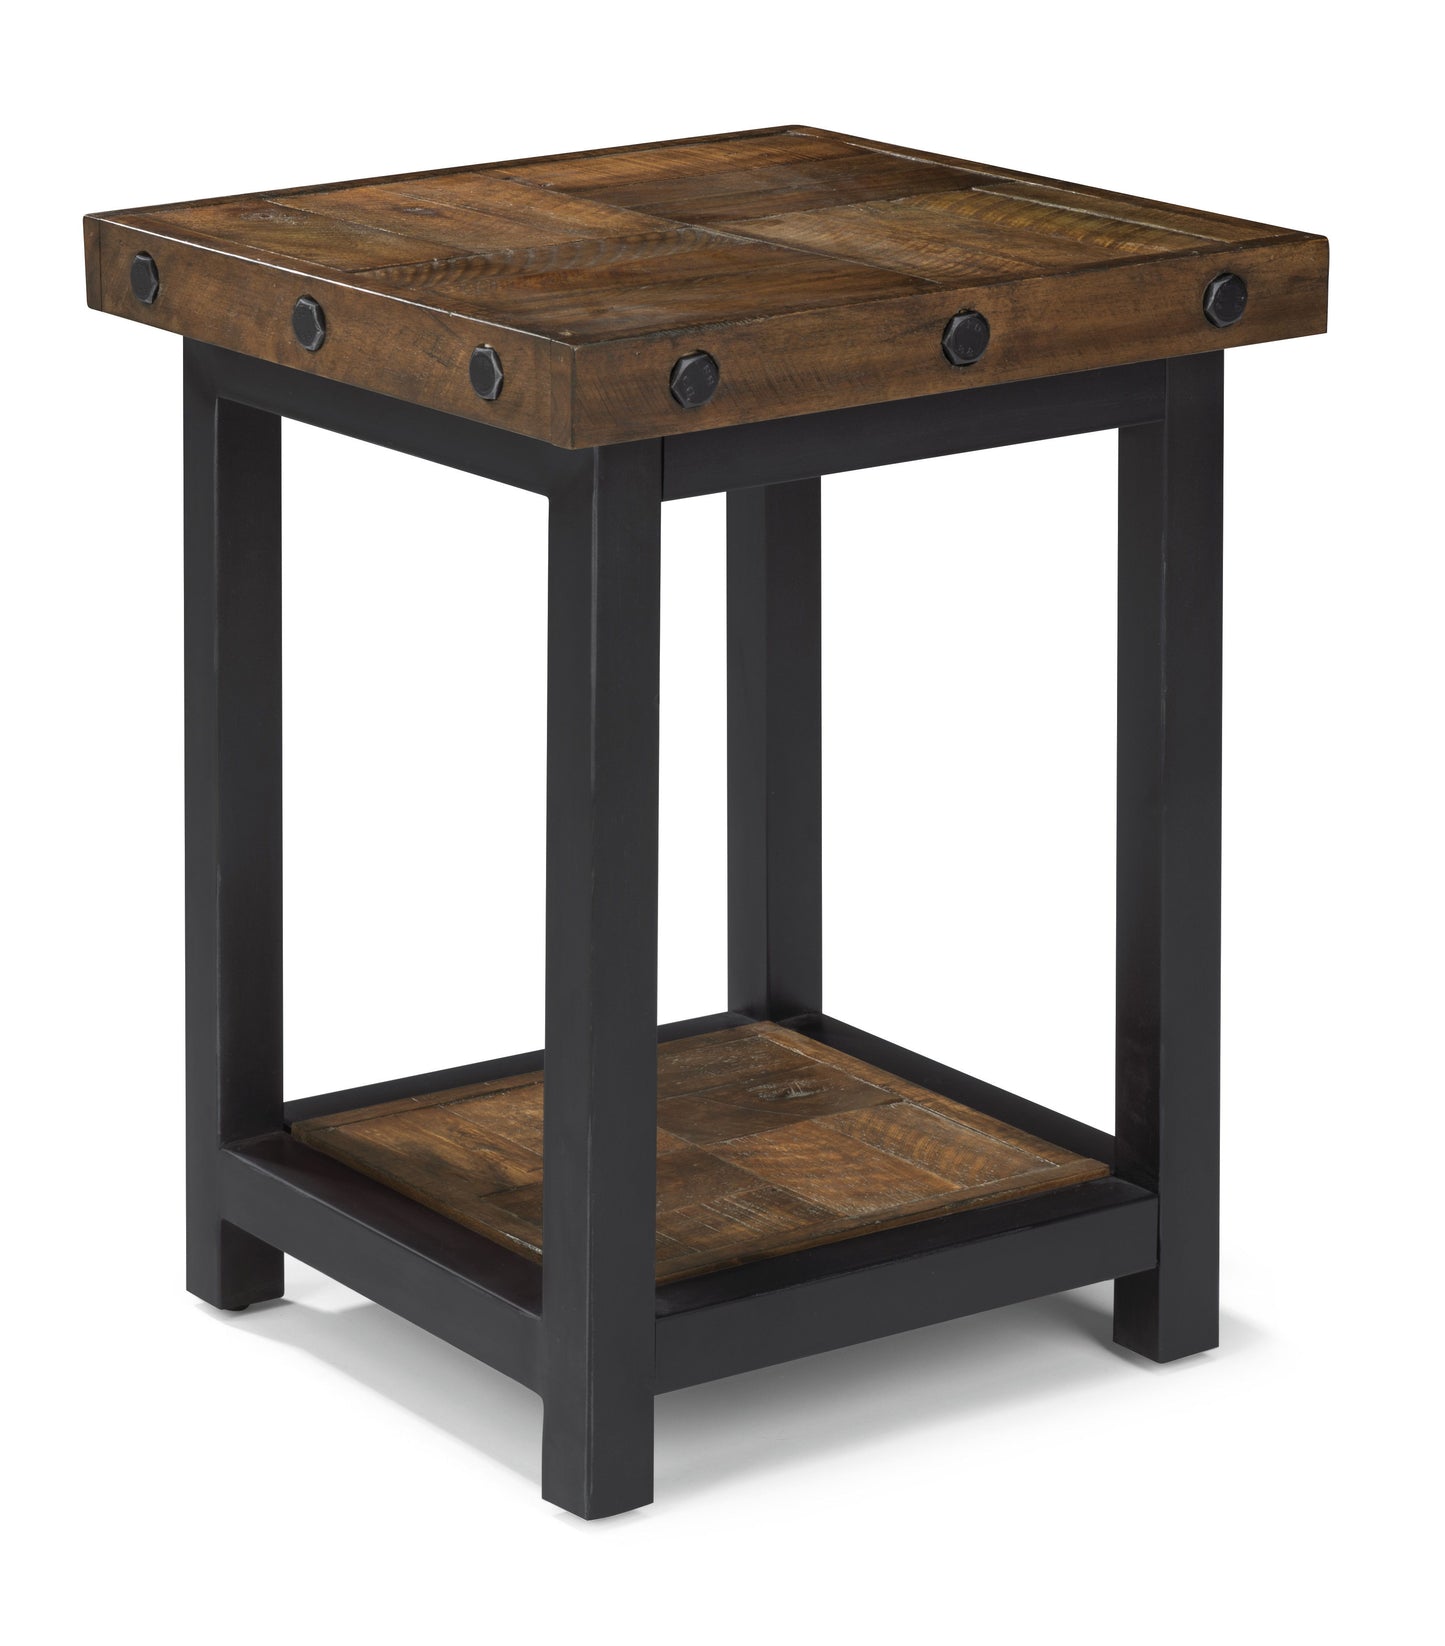 Carpenter - Chair Side Table